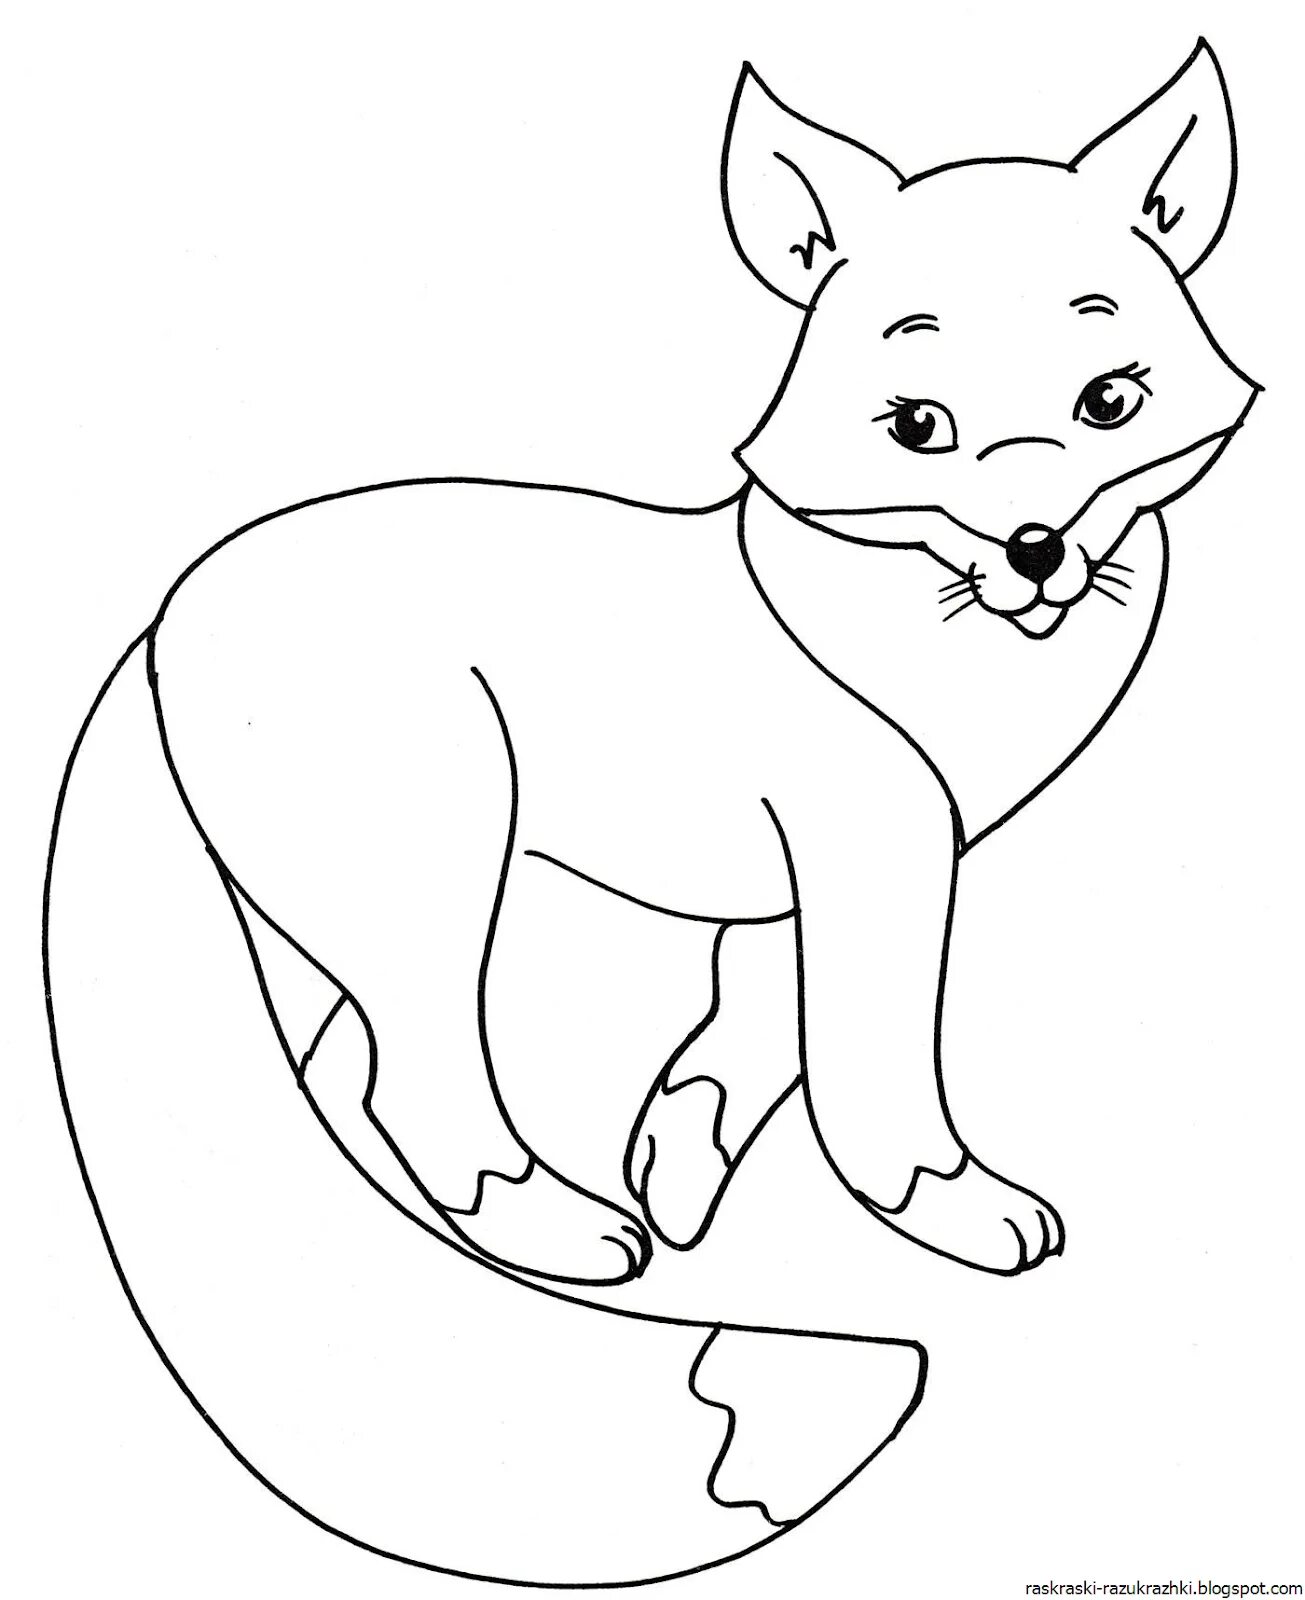 Zany fox coloring book for kids